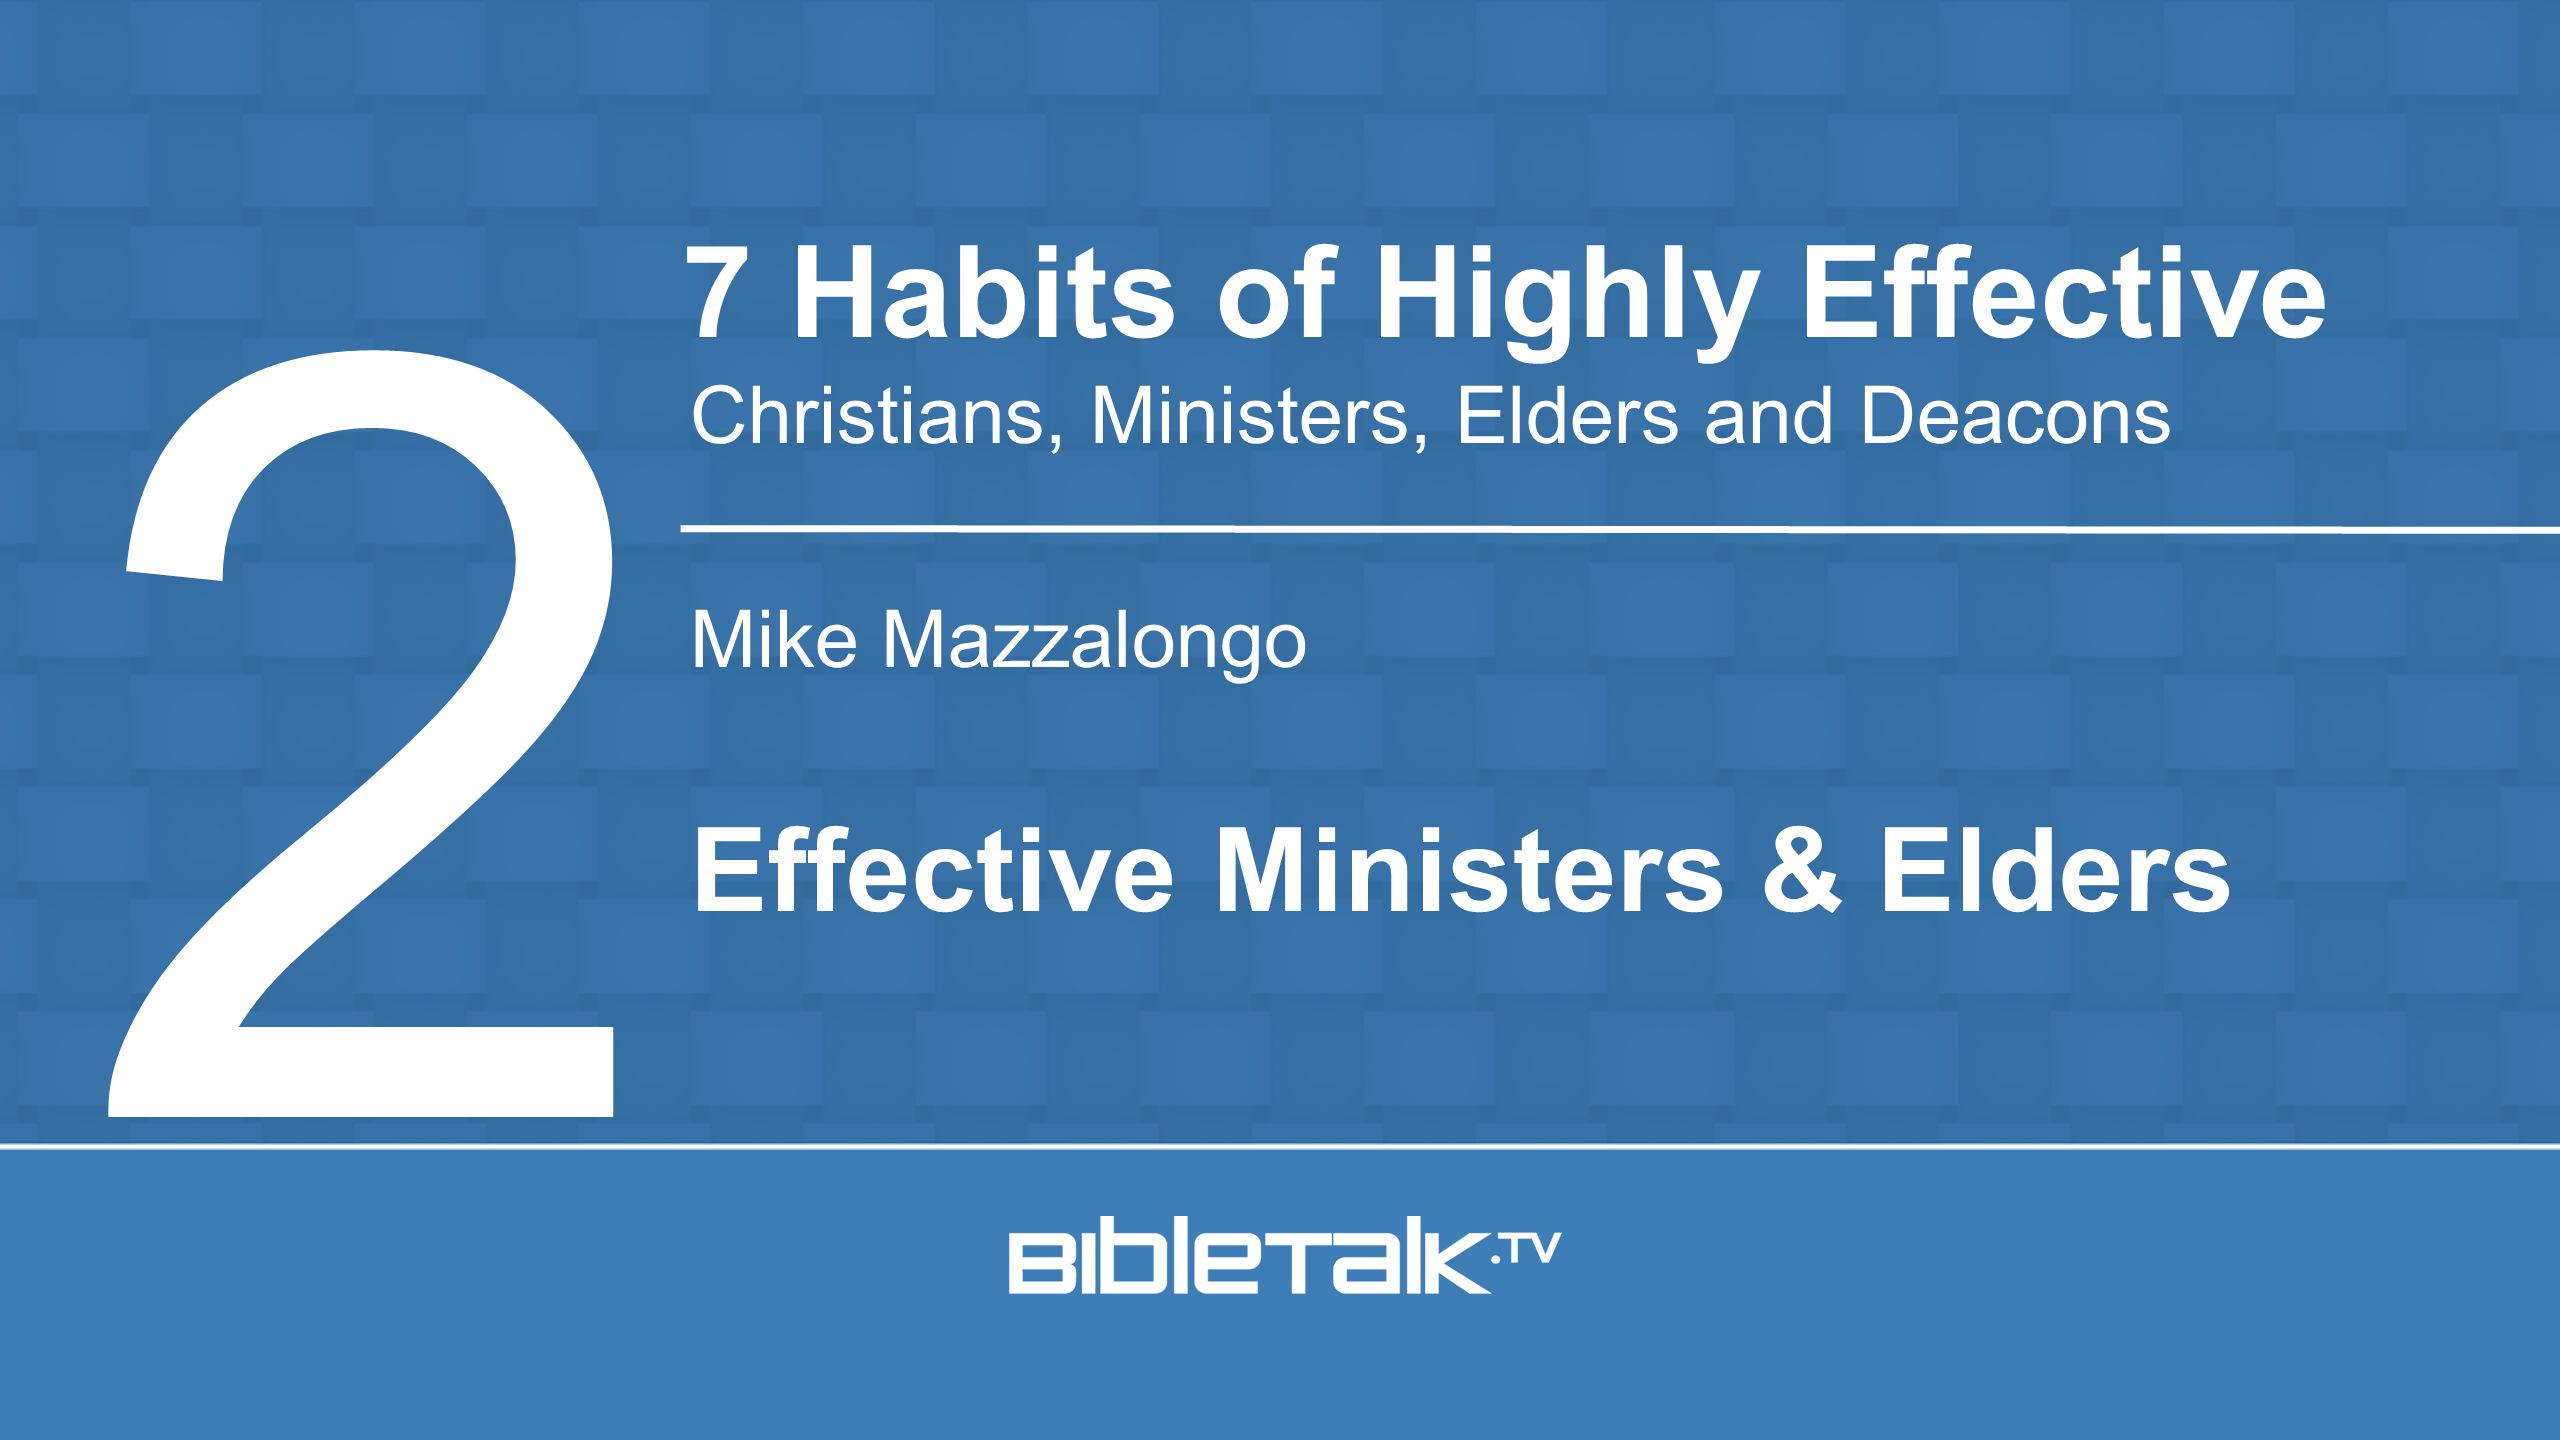 Mike Mazzalongo 7 Habits of Highly Effective Christians, Ministers, Elders and Deacons 2 Effective Ministers & Elders